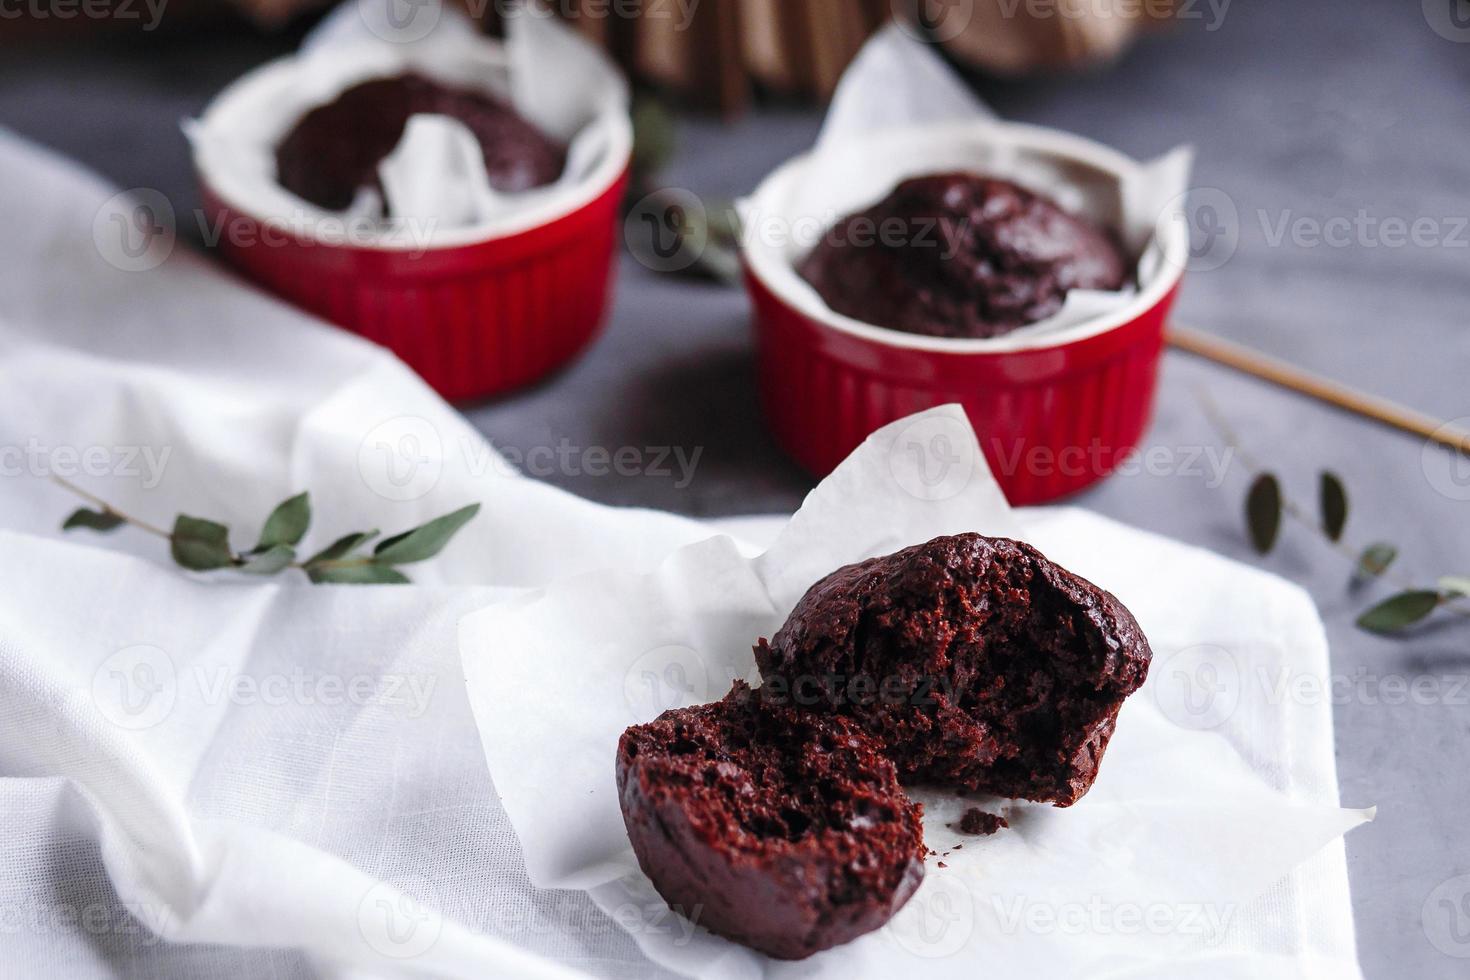 Chocolate muffins in red cups. Small glazed ceramic ramekin with brown cakes on a gray and white background. photo